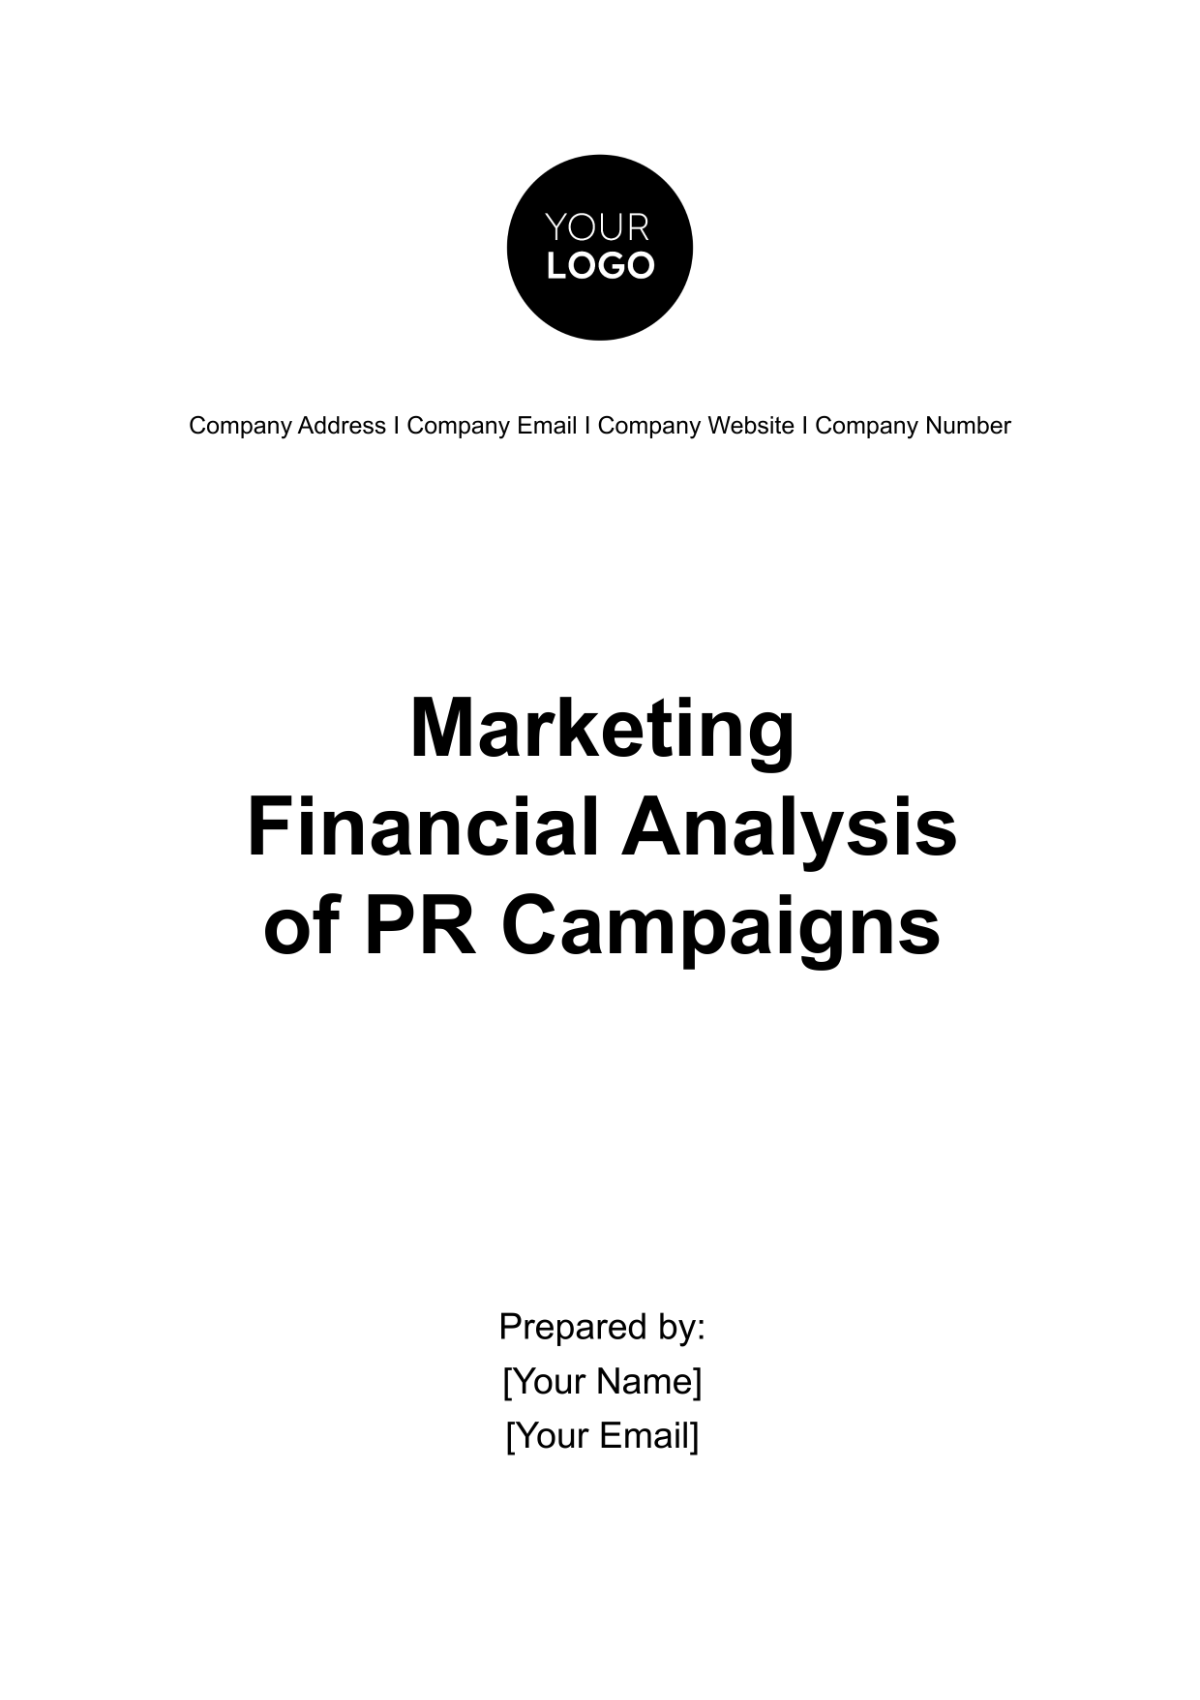 Free Marketing Financial Analysis of PR Campaigns Template